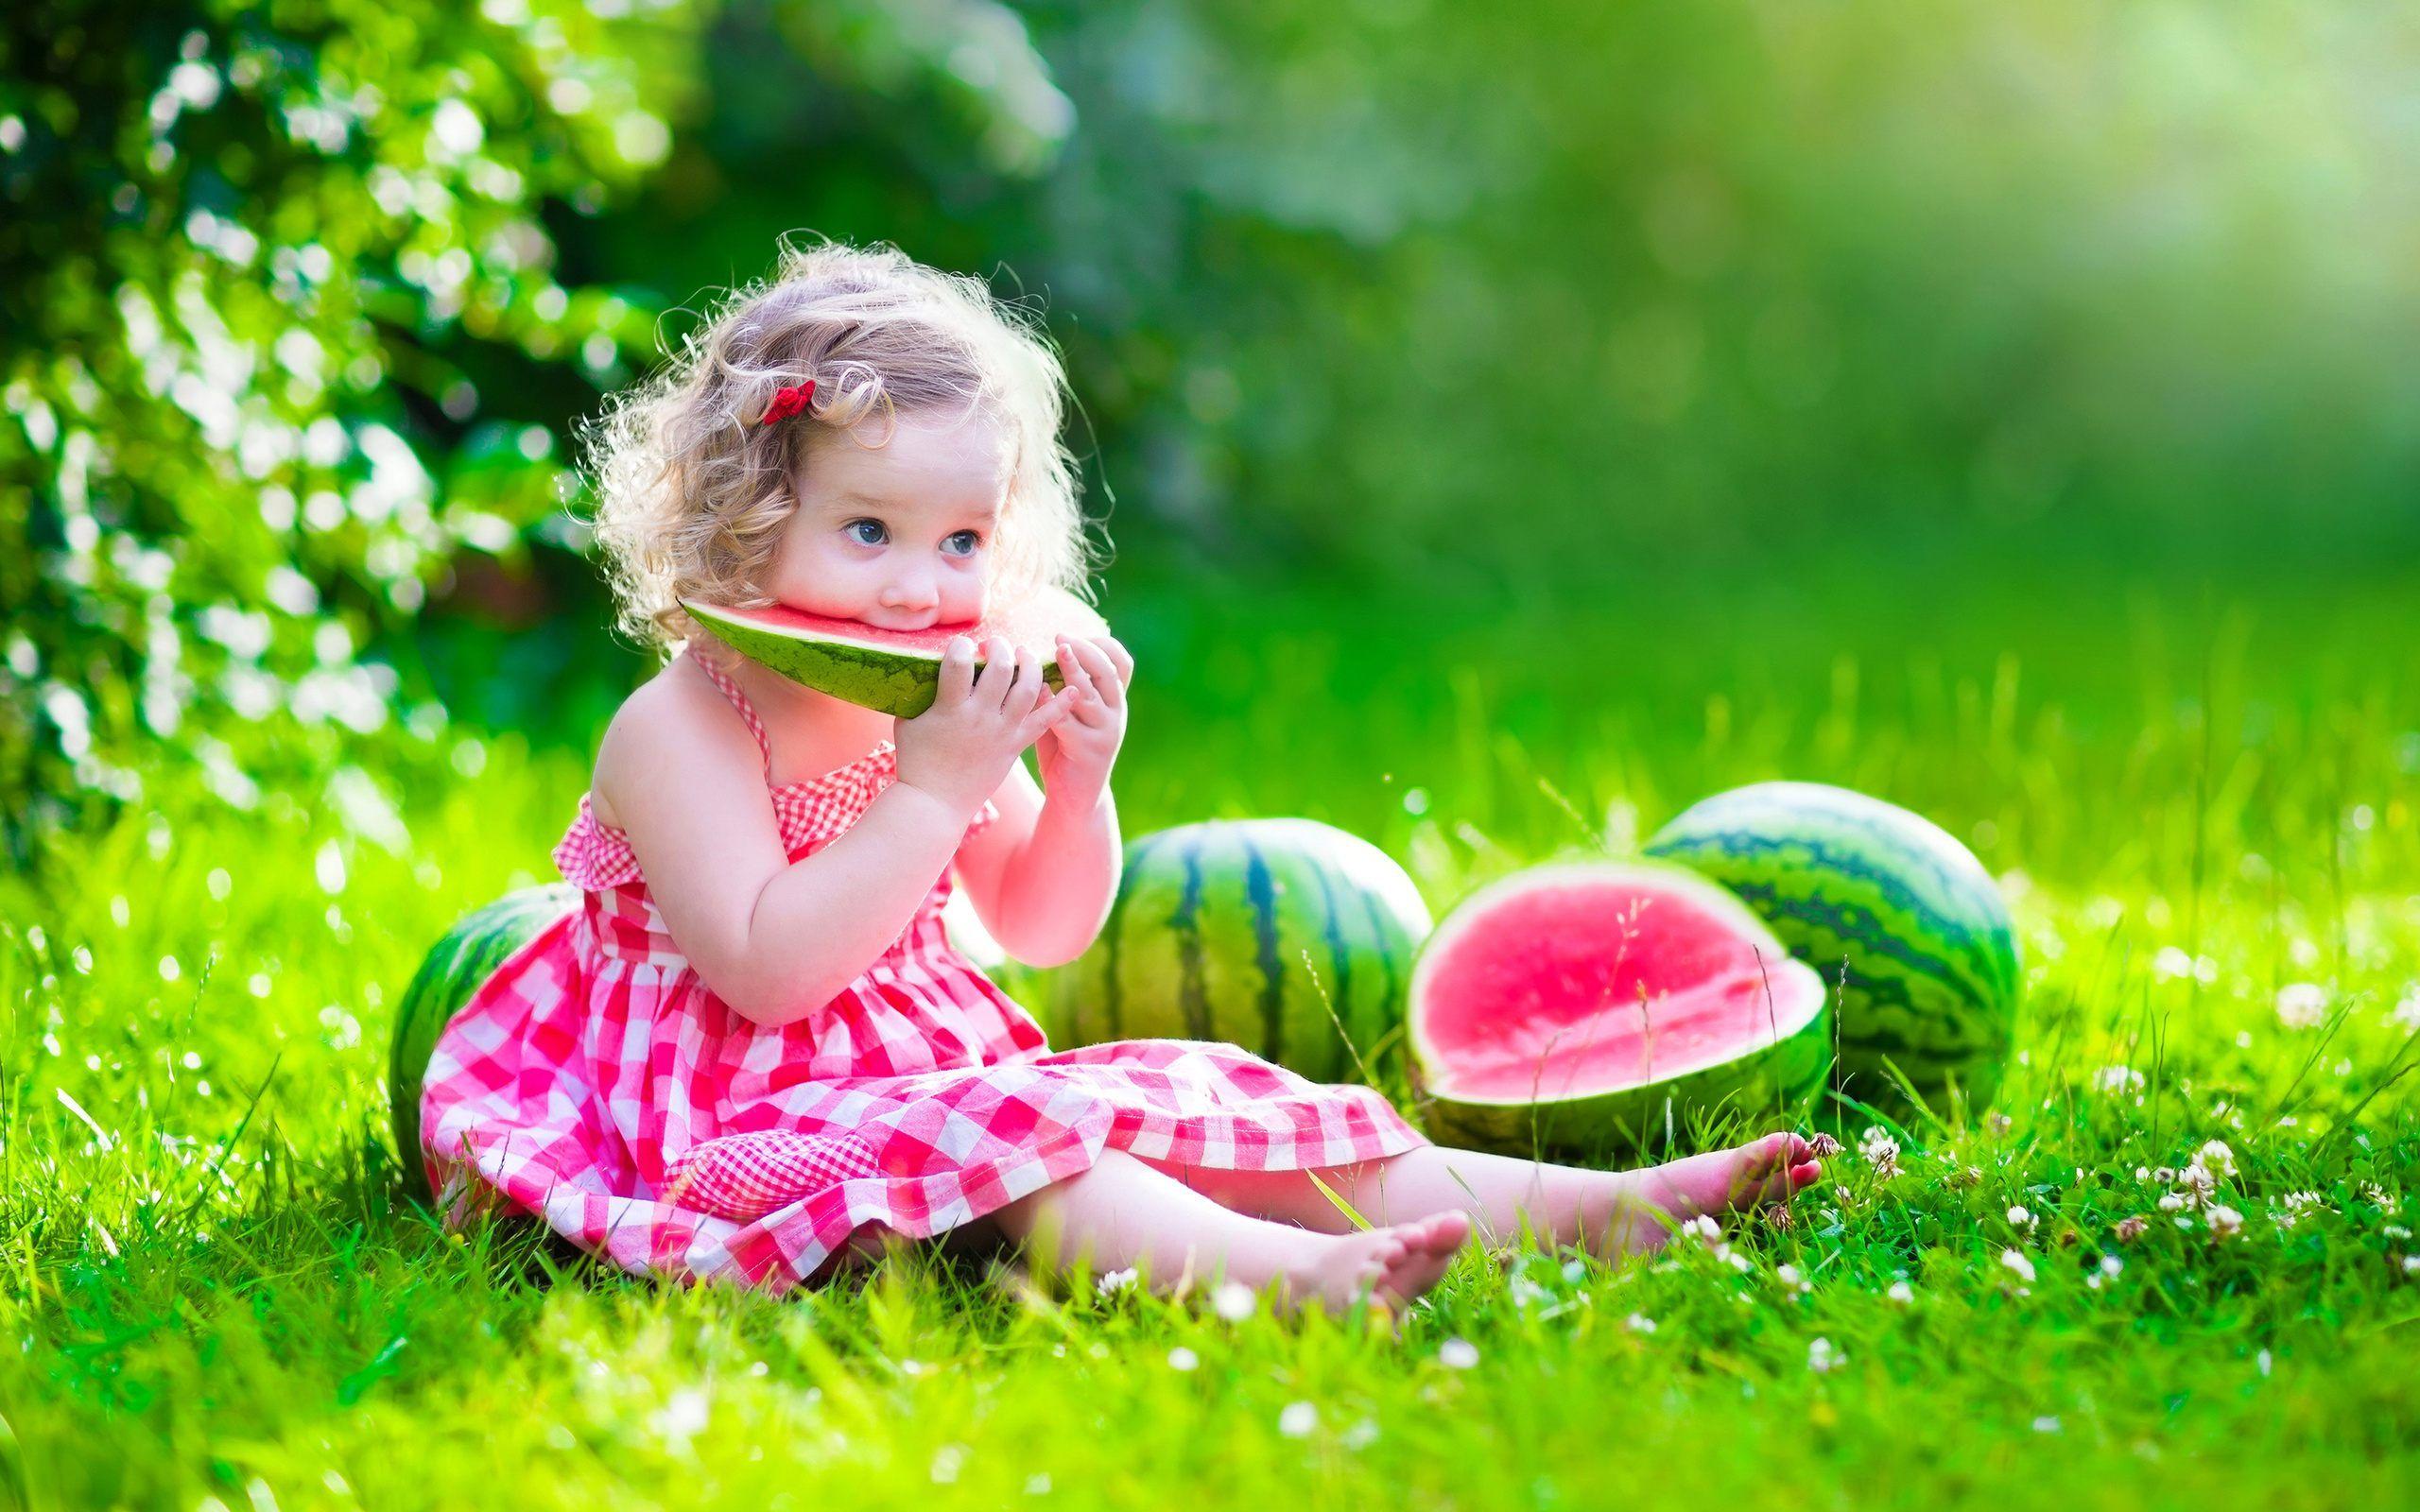 Watermelon Baby Cute Wallpaper In High Quality Photo For Mobile